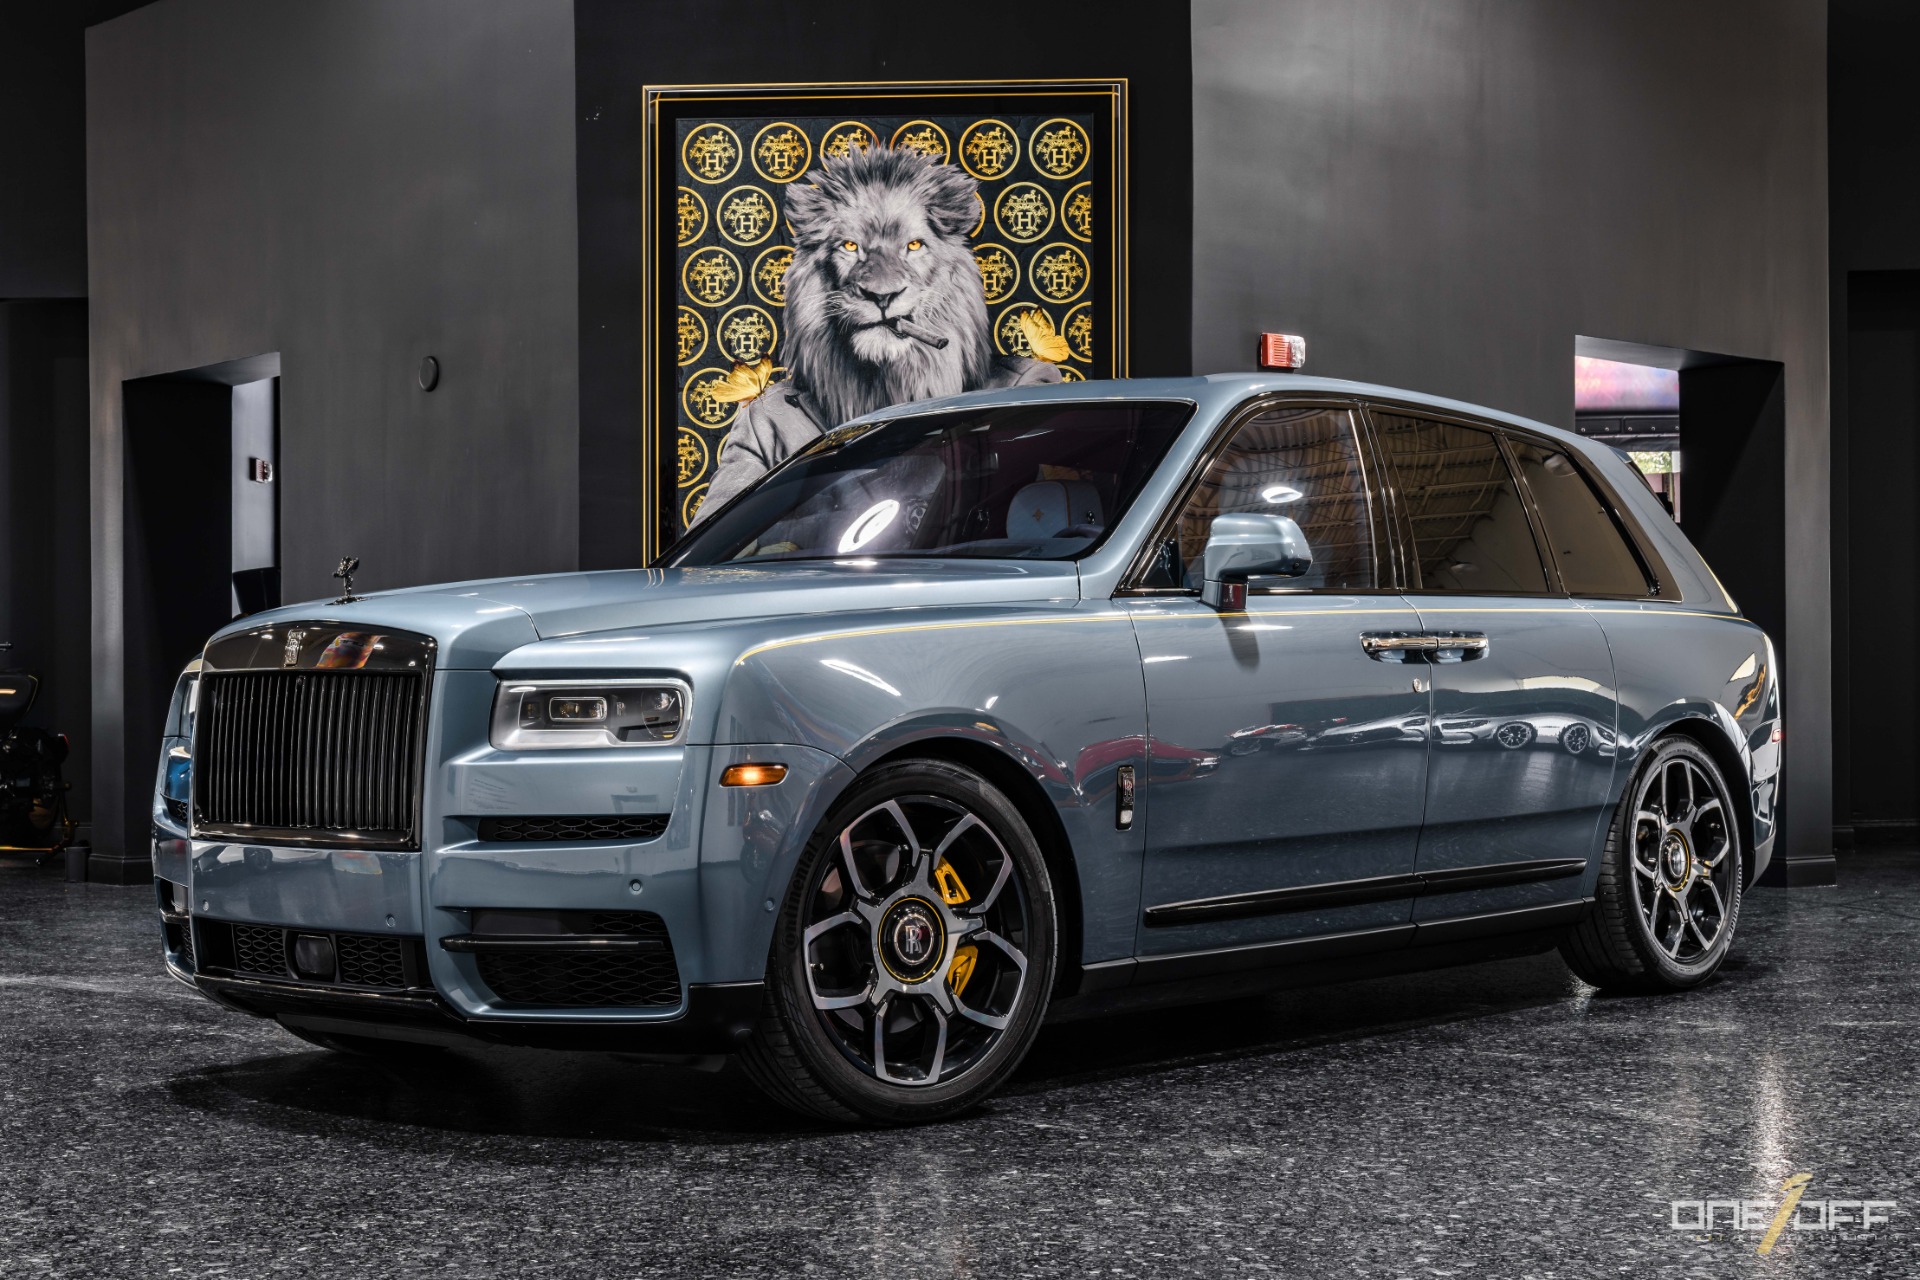 2022 Rolls Royce Cullinan Black Badge by MANSORY - Perfect SUV in detail 